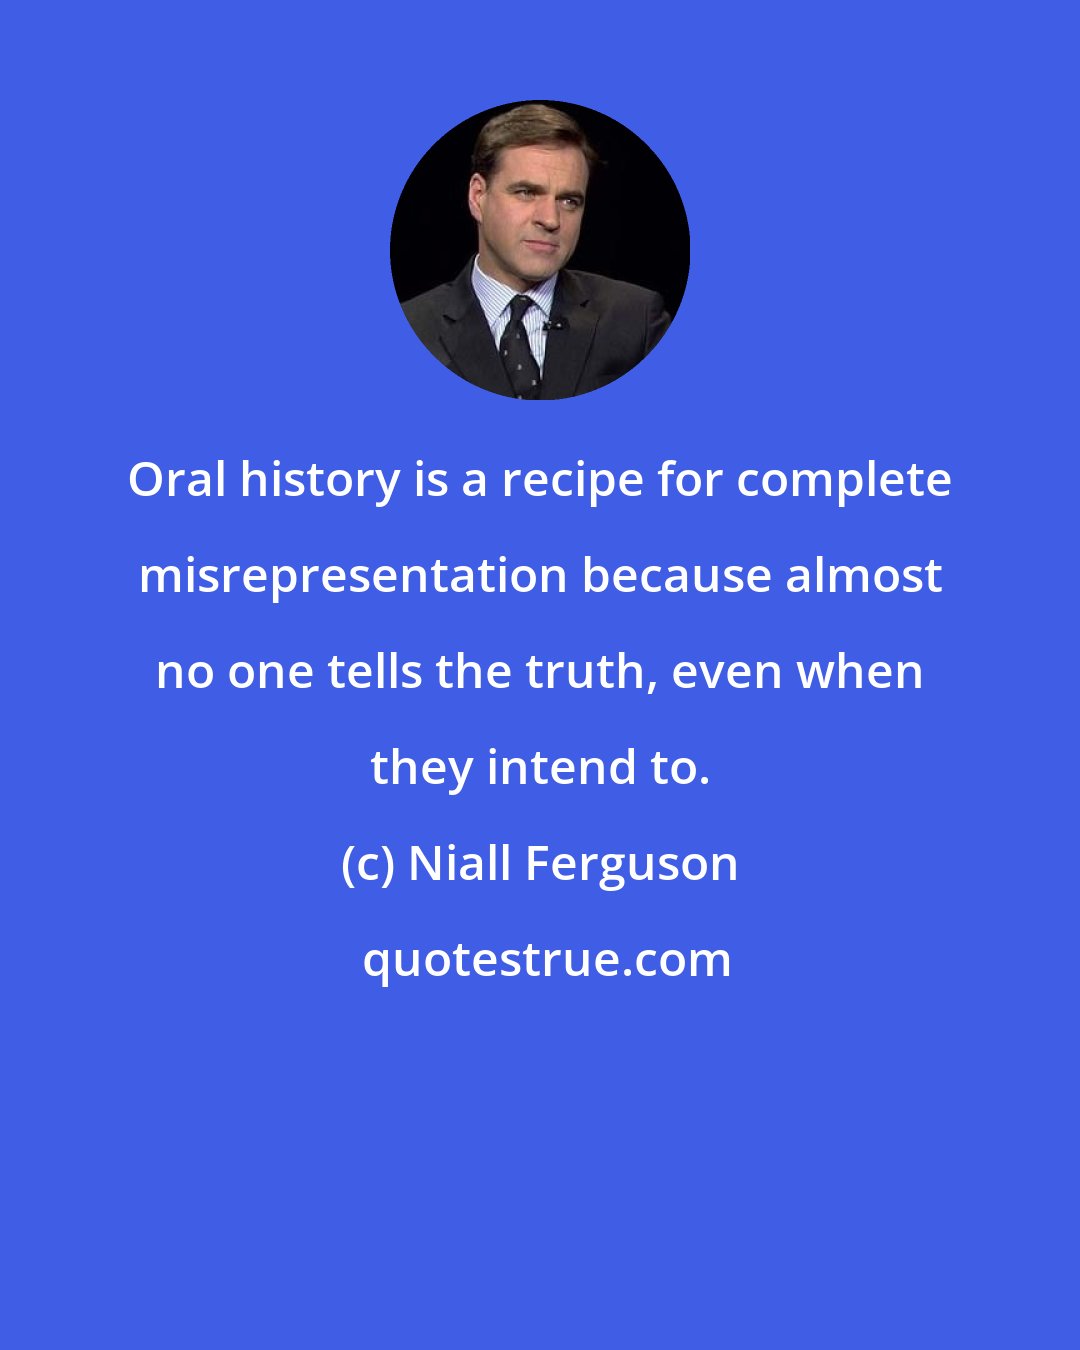 Niall Ferguson: Oral history is a recipe for complete misrepresentation because almost no one tells the truth, even when they intend to.